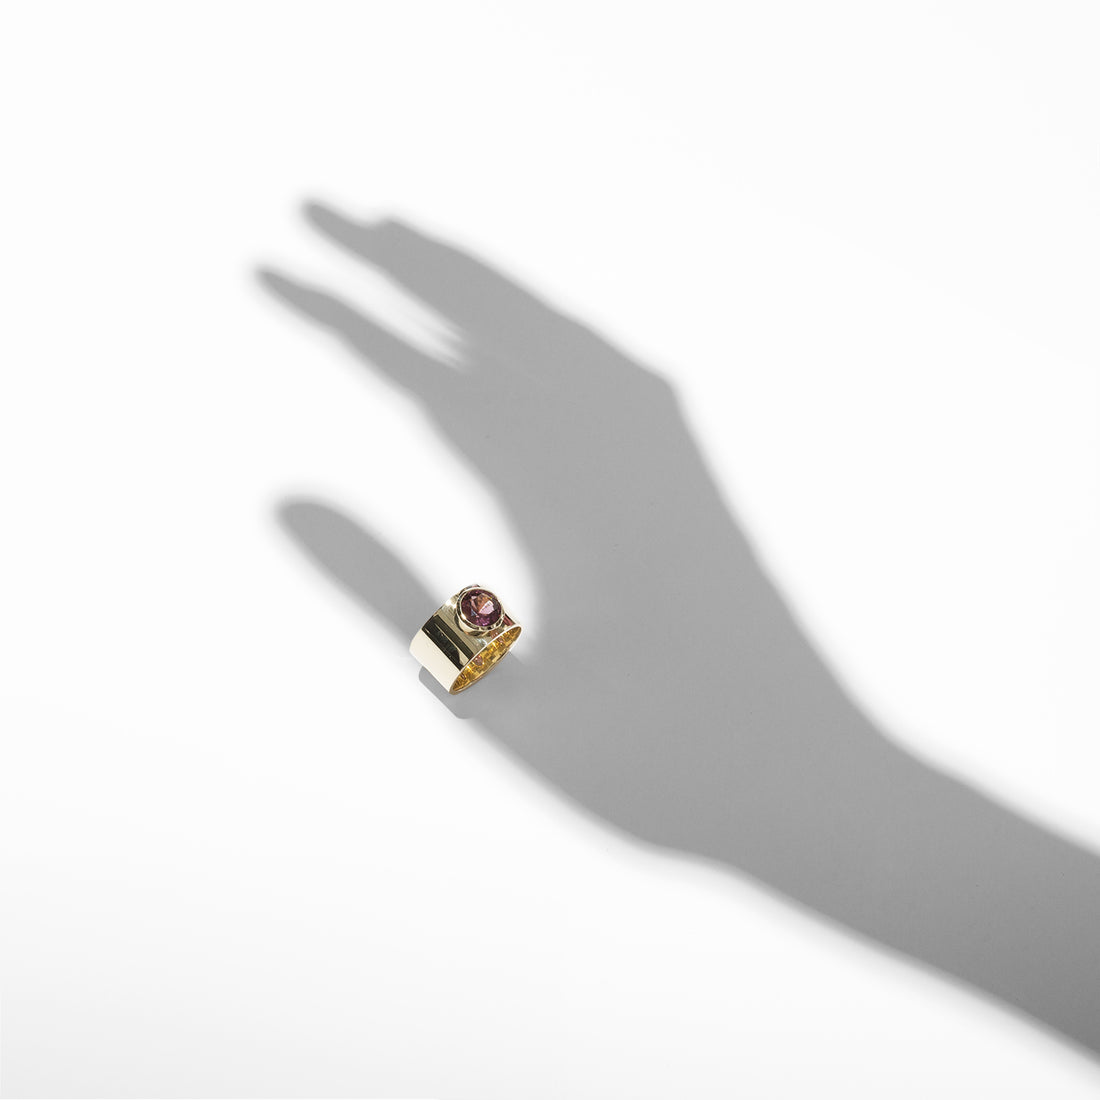 ILA SODHANI Aubergine ring with a magenta natural spinel stone on a wide yellow gold cigar band; shown with a shadow positioned to look like the ring is worn on the thumb.